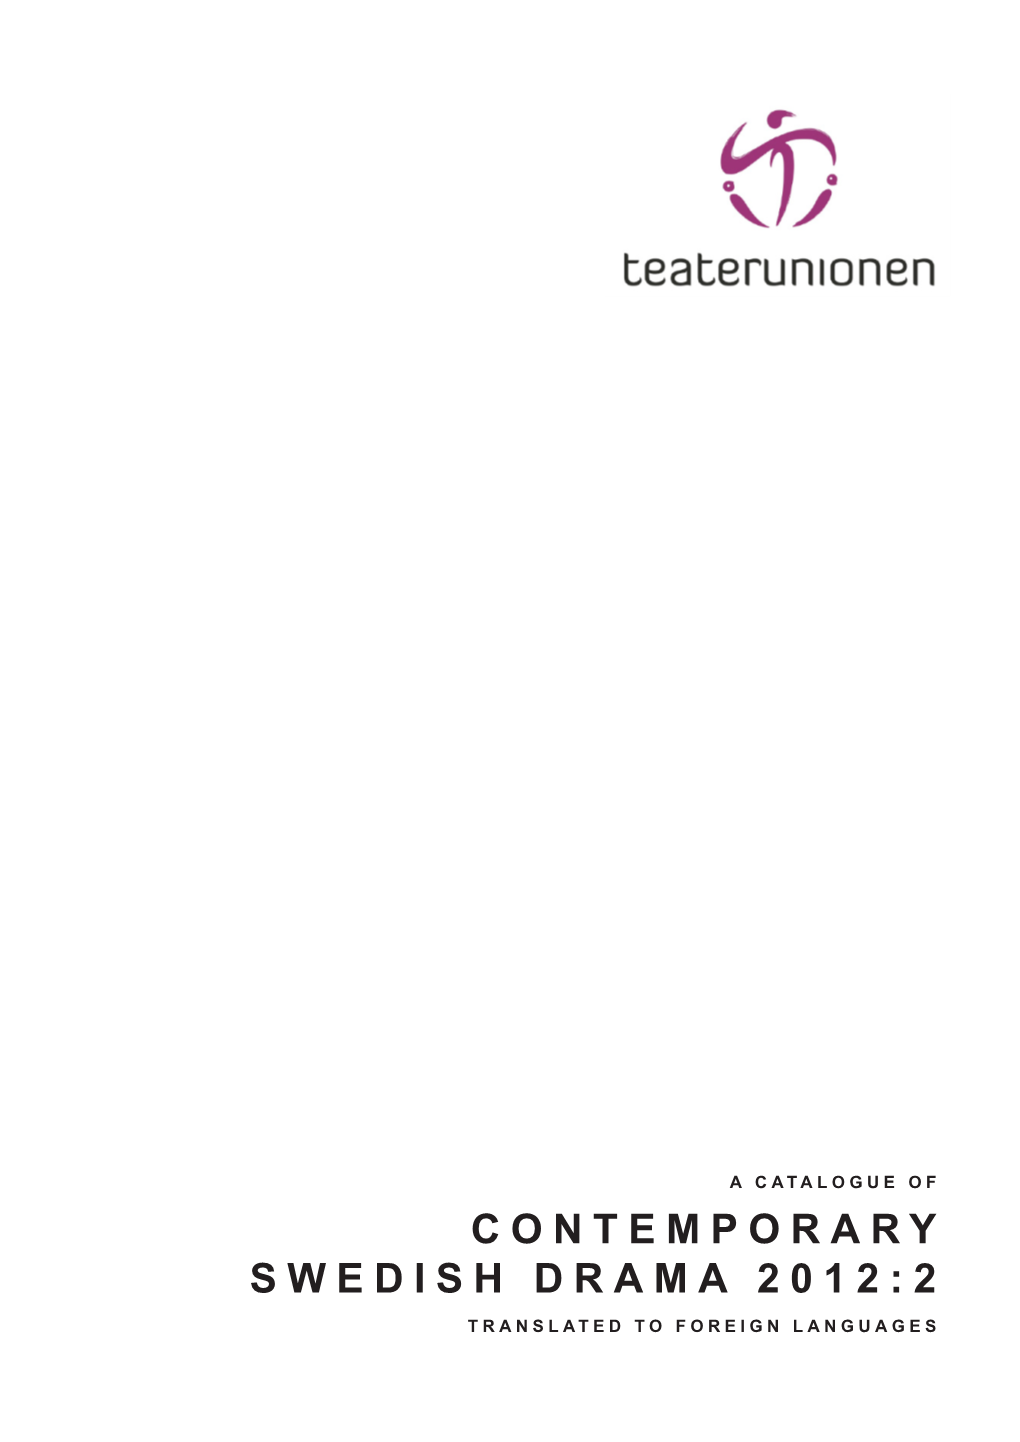 A Catalogue of Contemporary Swedish Drama 2012:2 Translated to Foreign Languages